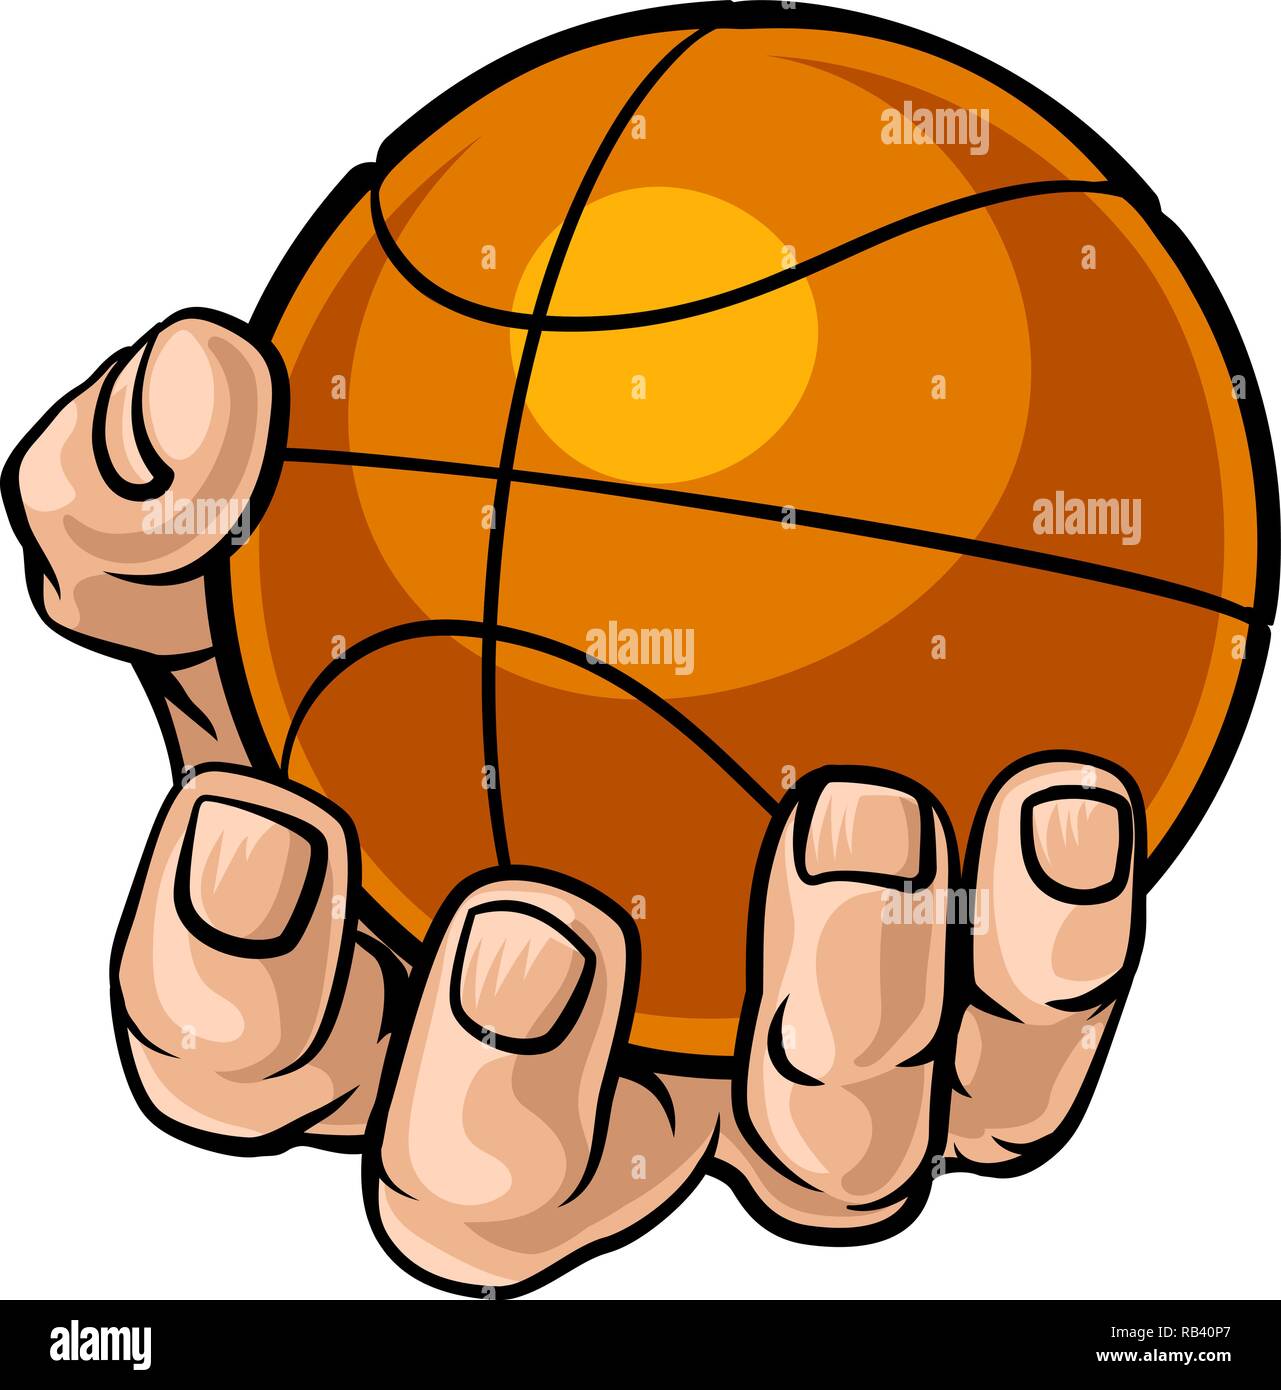 Basketball ball hand icon Banque d'images vectorielles - Alamy